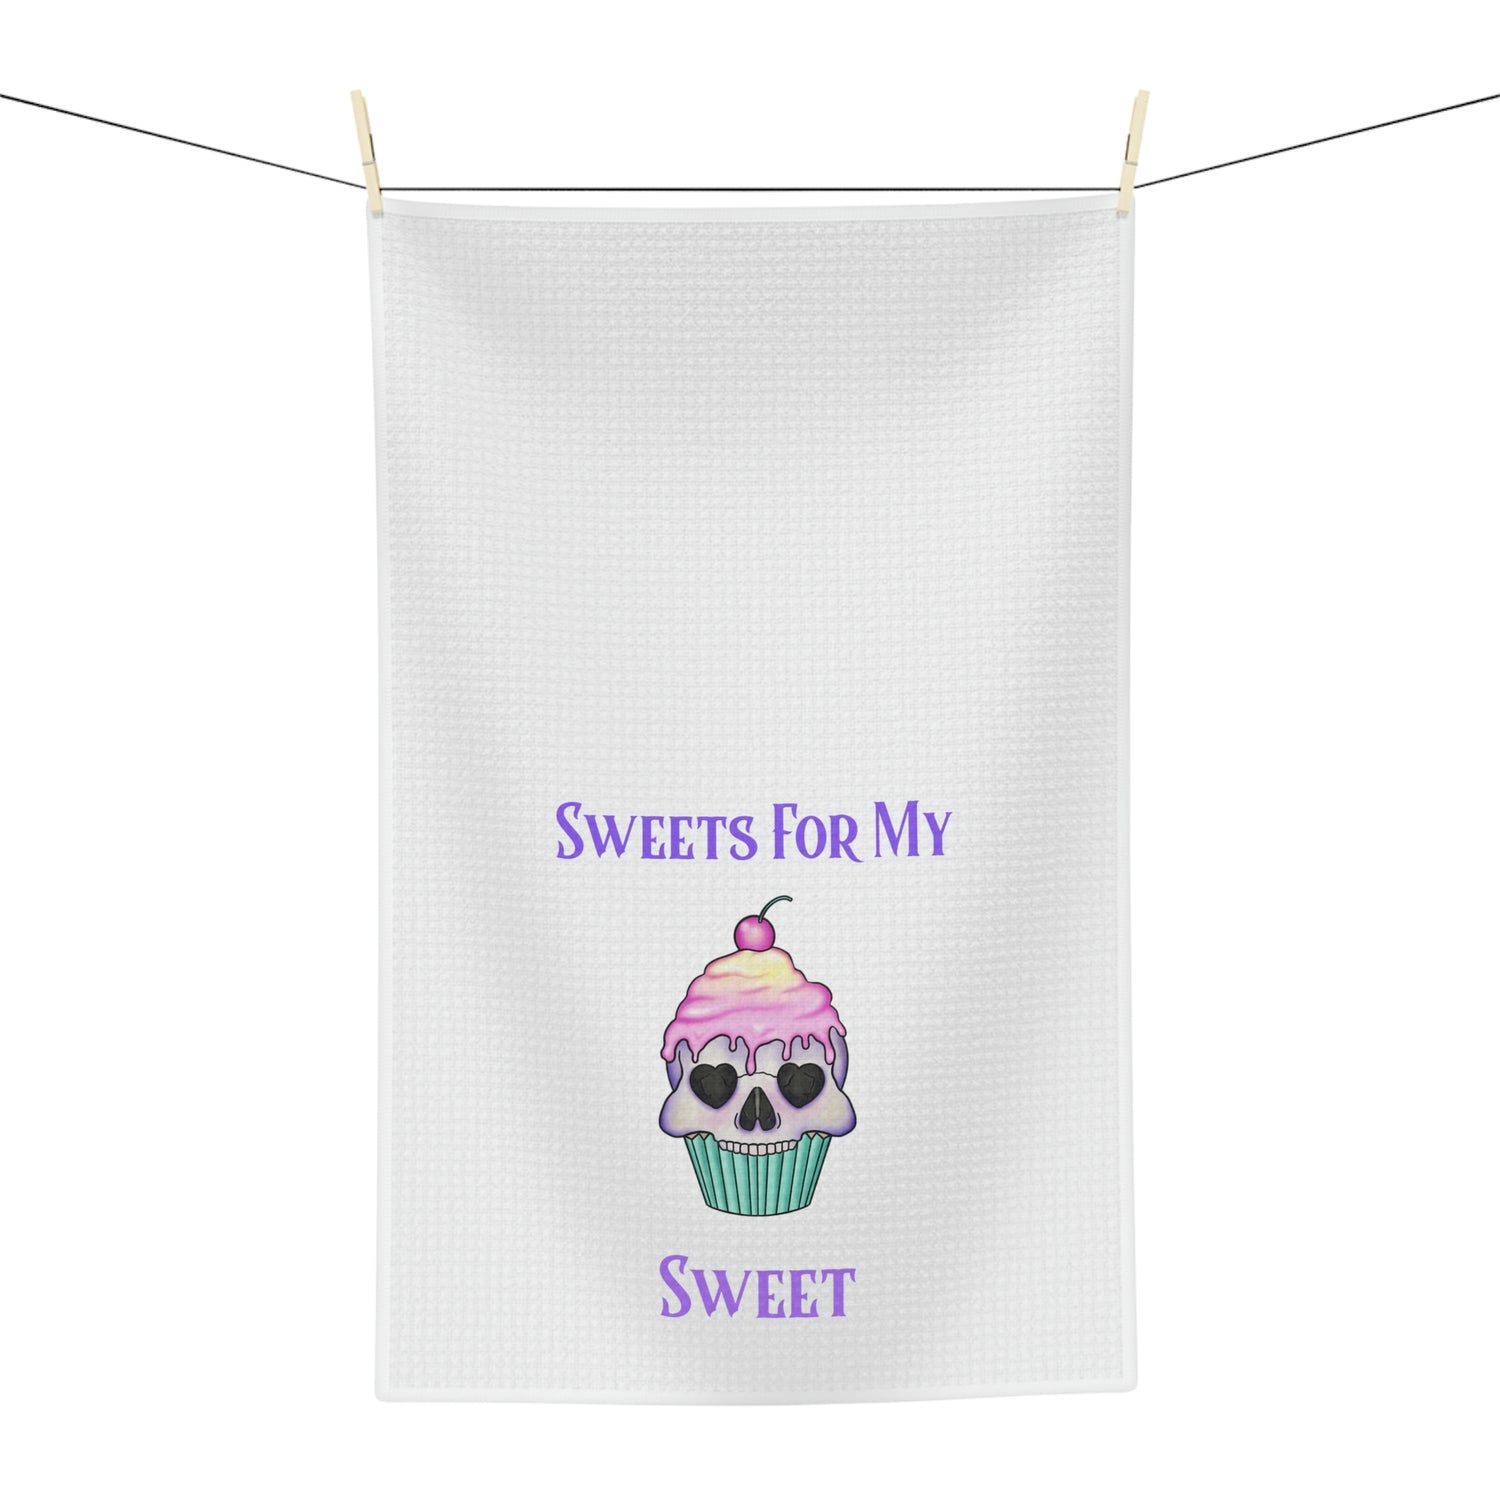 White Sweets Tea Towel - Witchy Kitchens